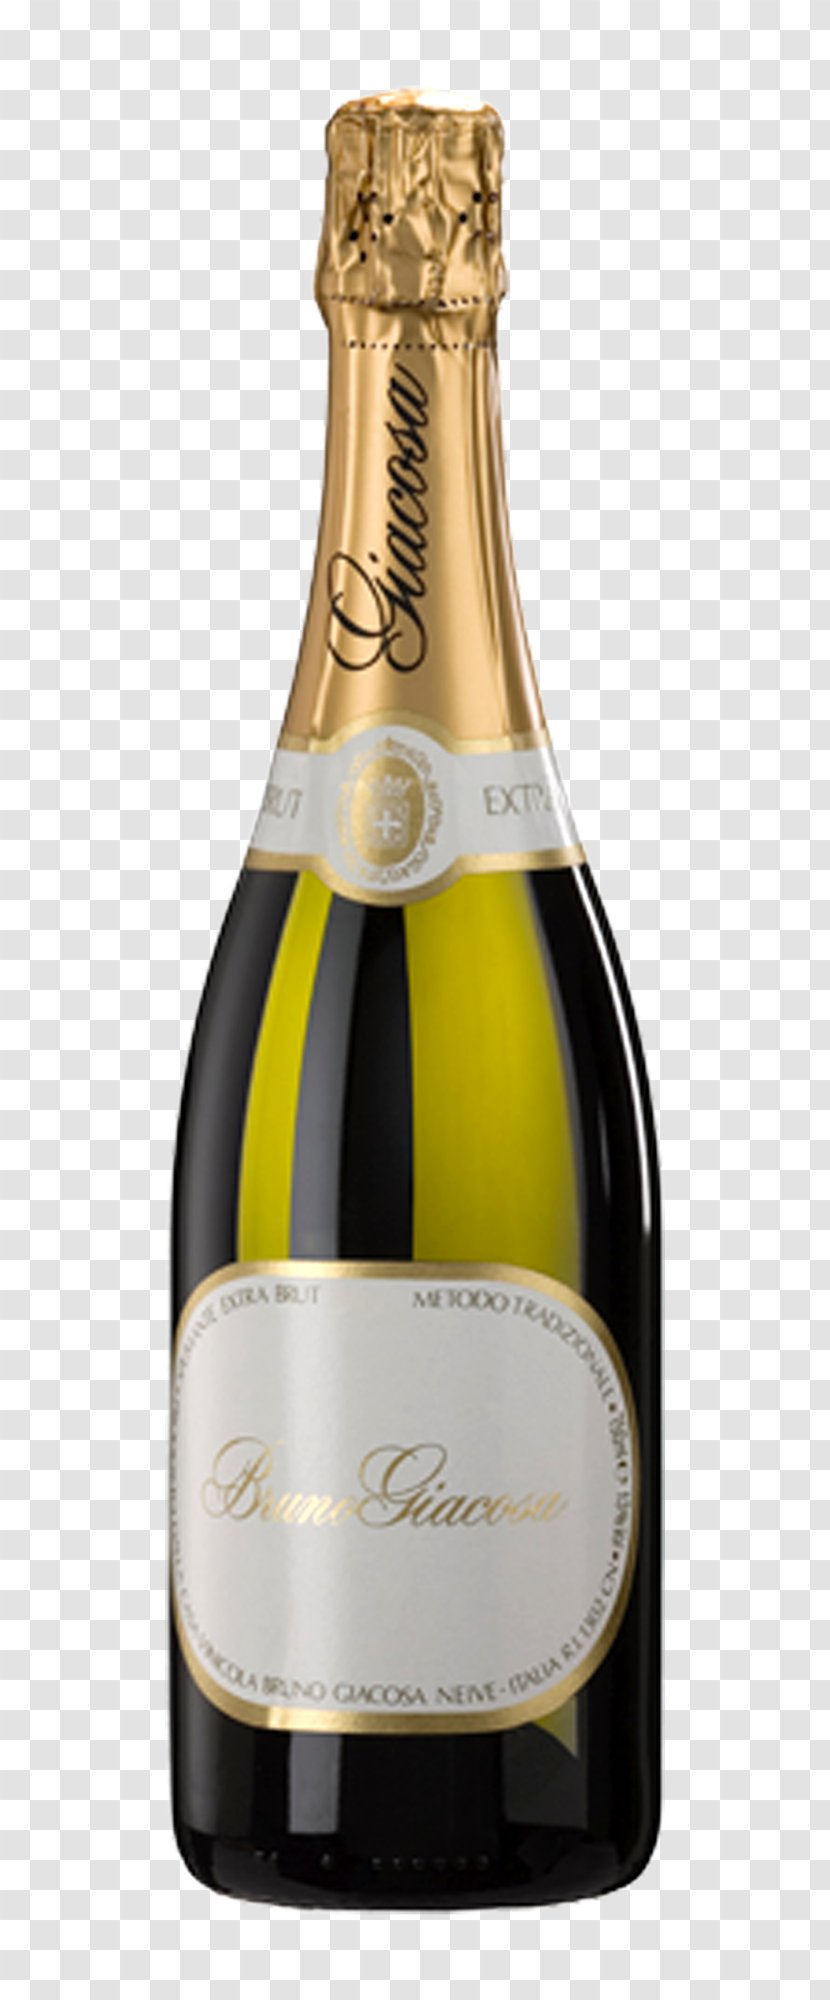 Champagne Bruno Giacosa Wine Arneis Dolcetto - Winemaking Transparent PNG